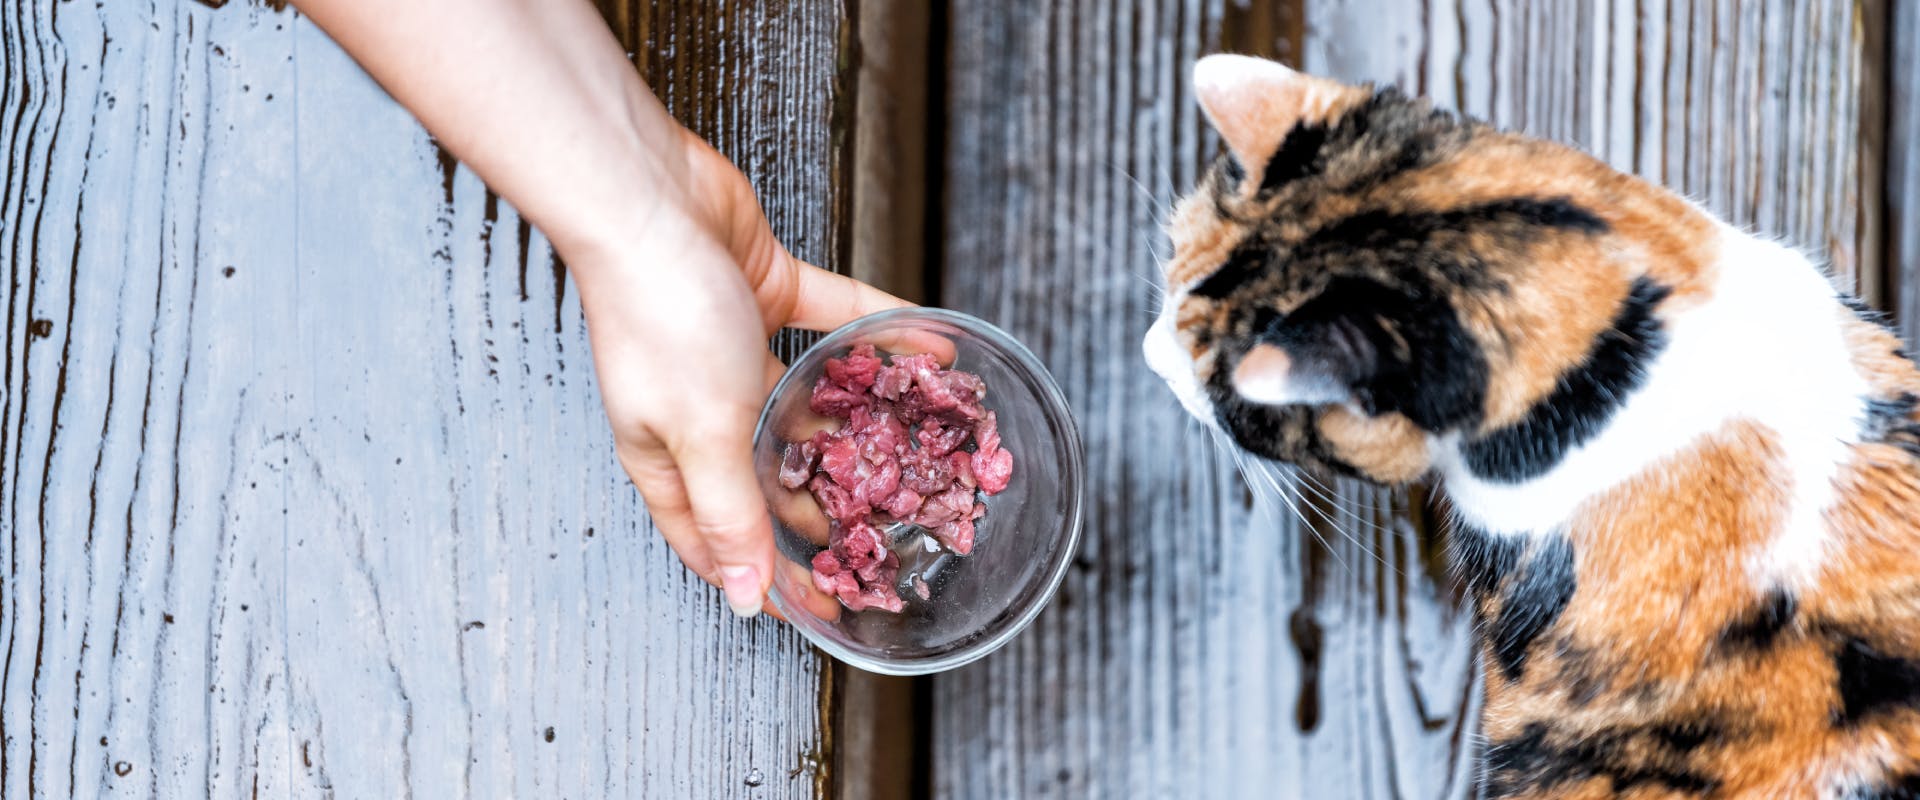 a human holding and showing a glass bowl of raw meat to calico cat from a top-down camera angle